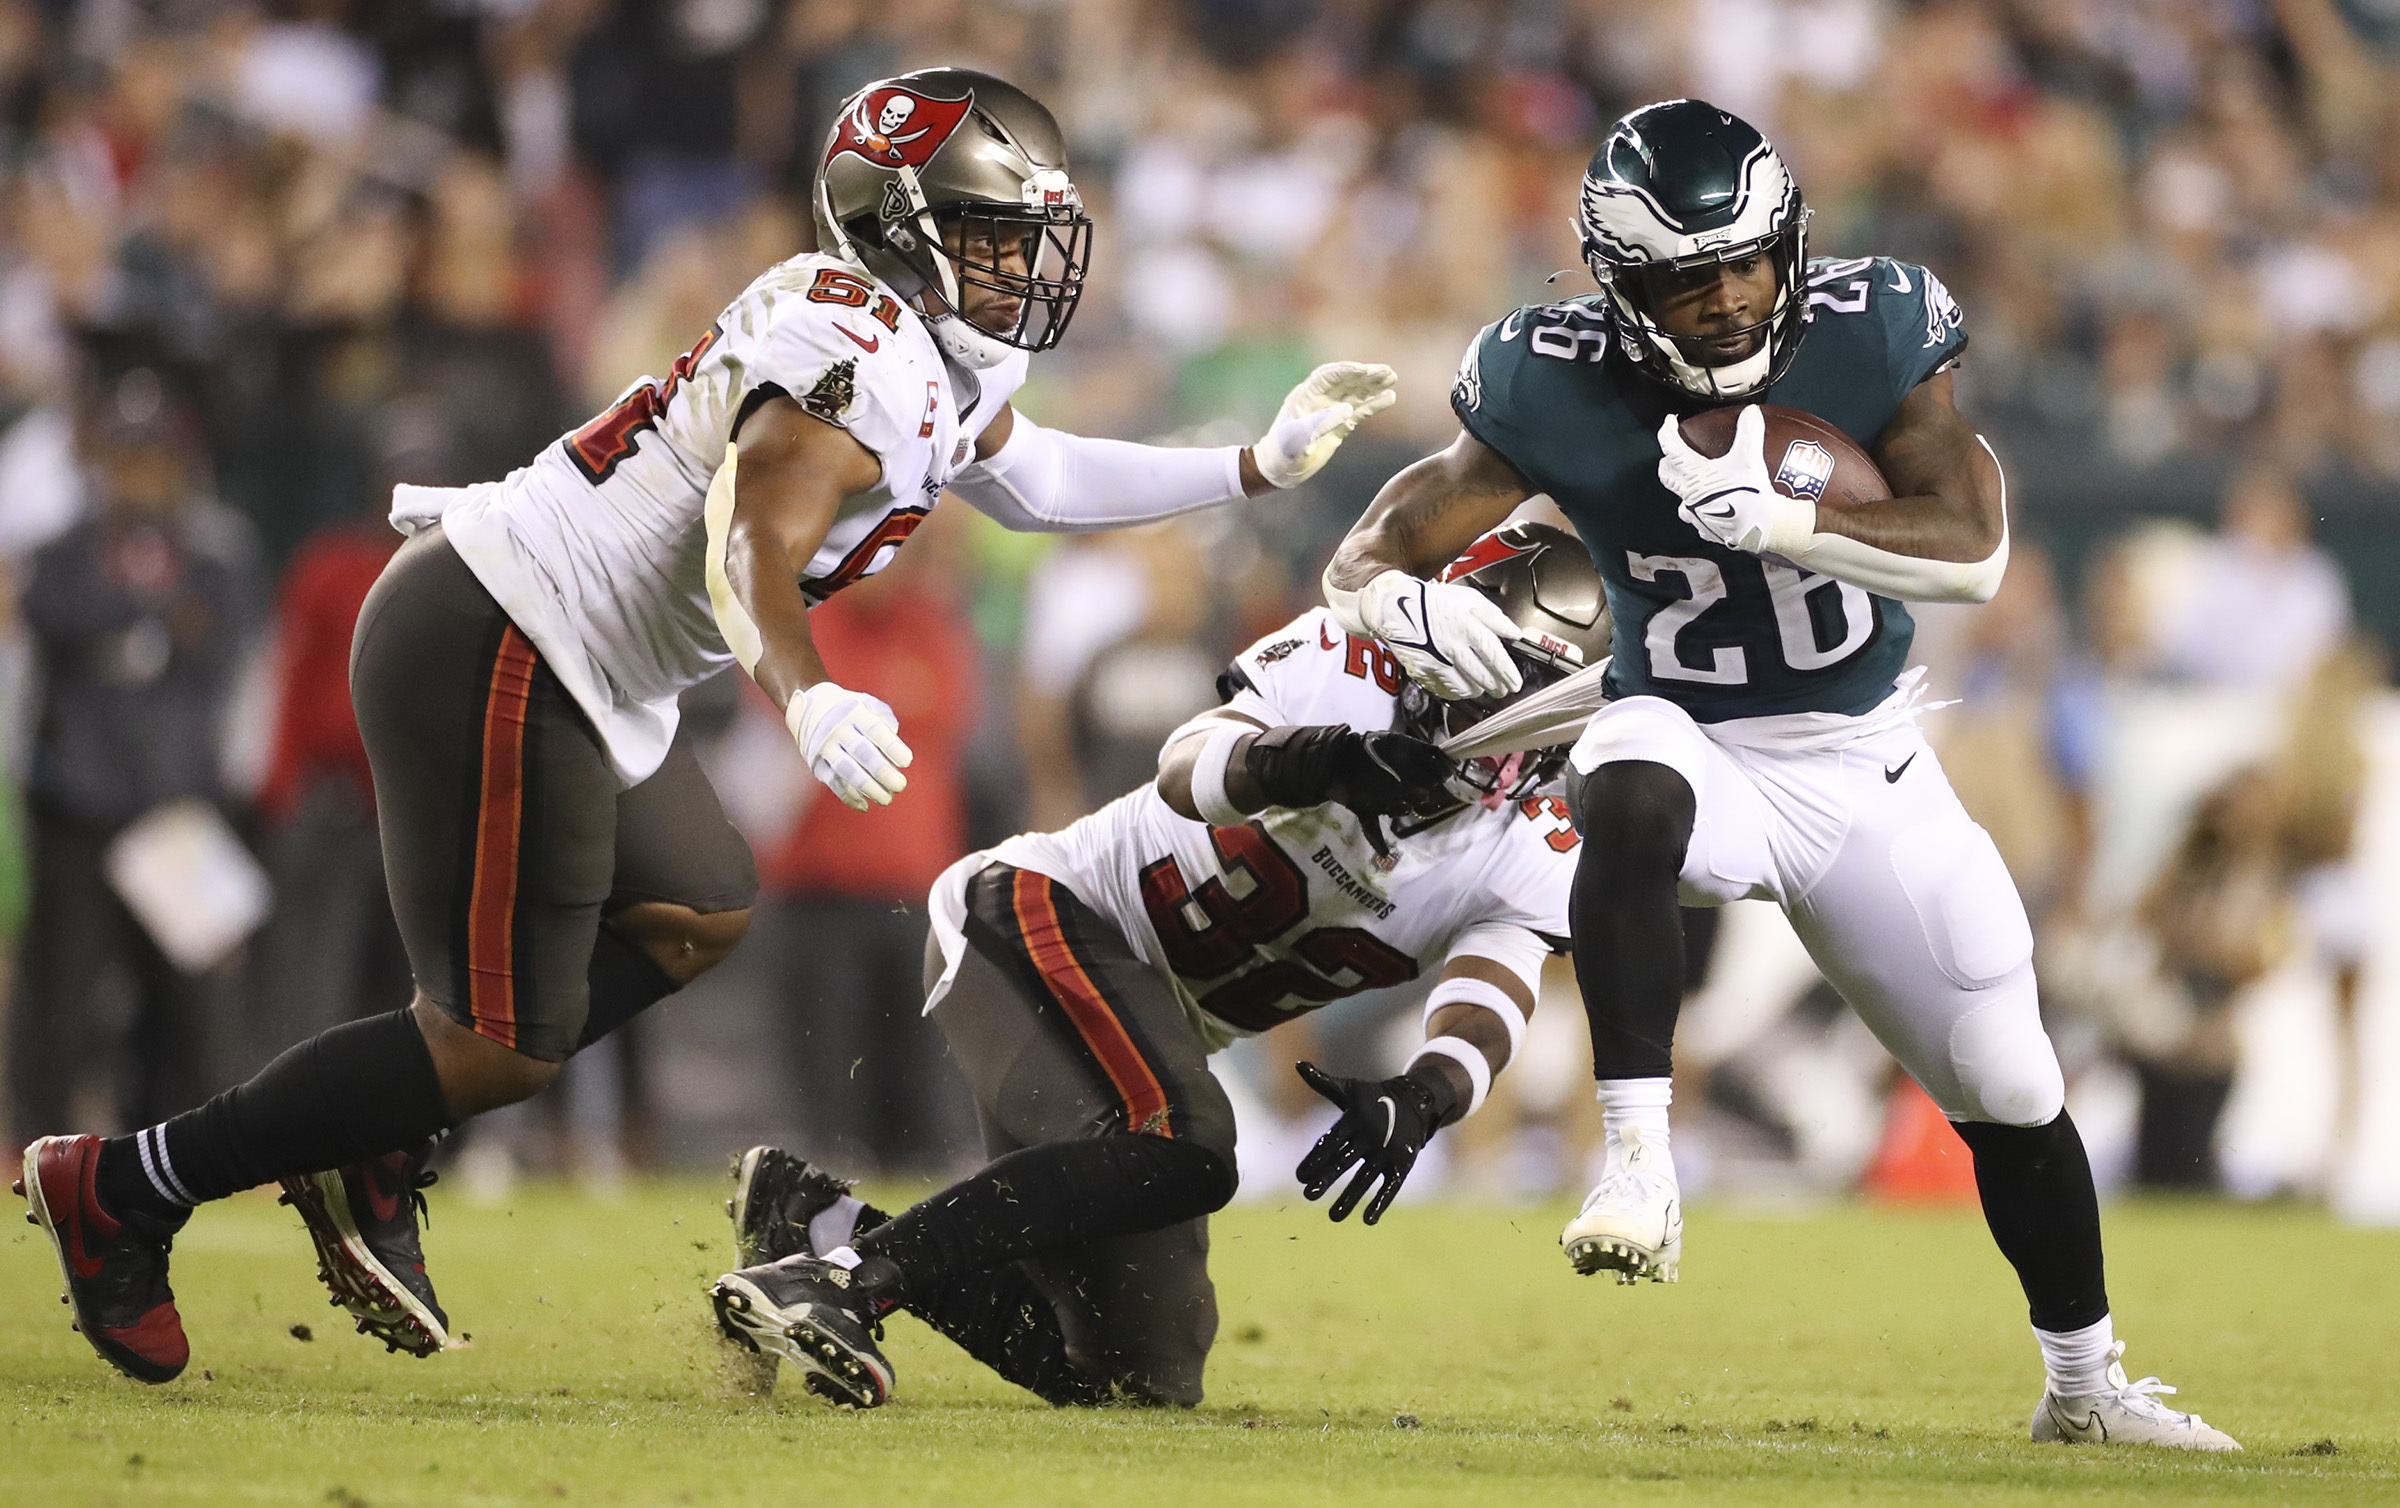 Bucs vs. Eagles: Pewter Preview For Week 3